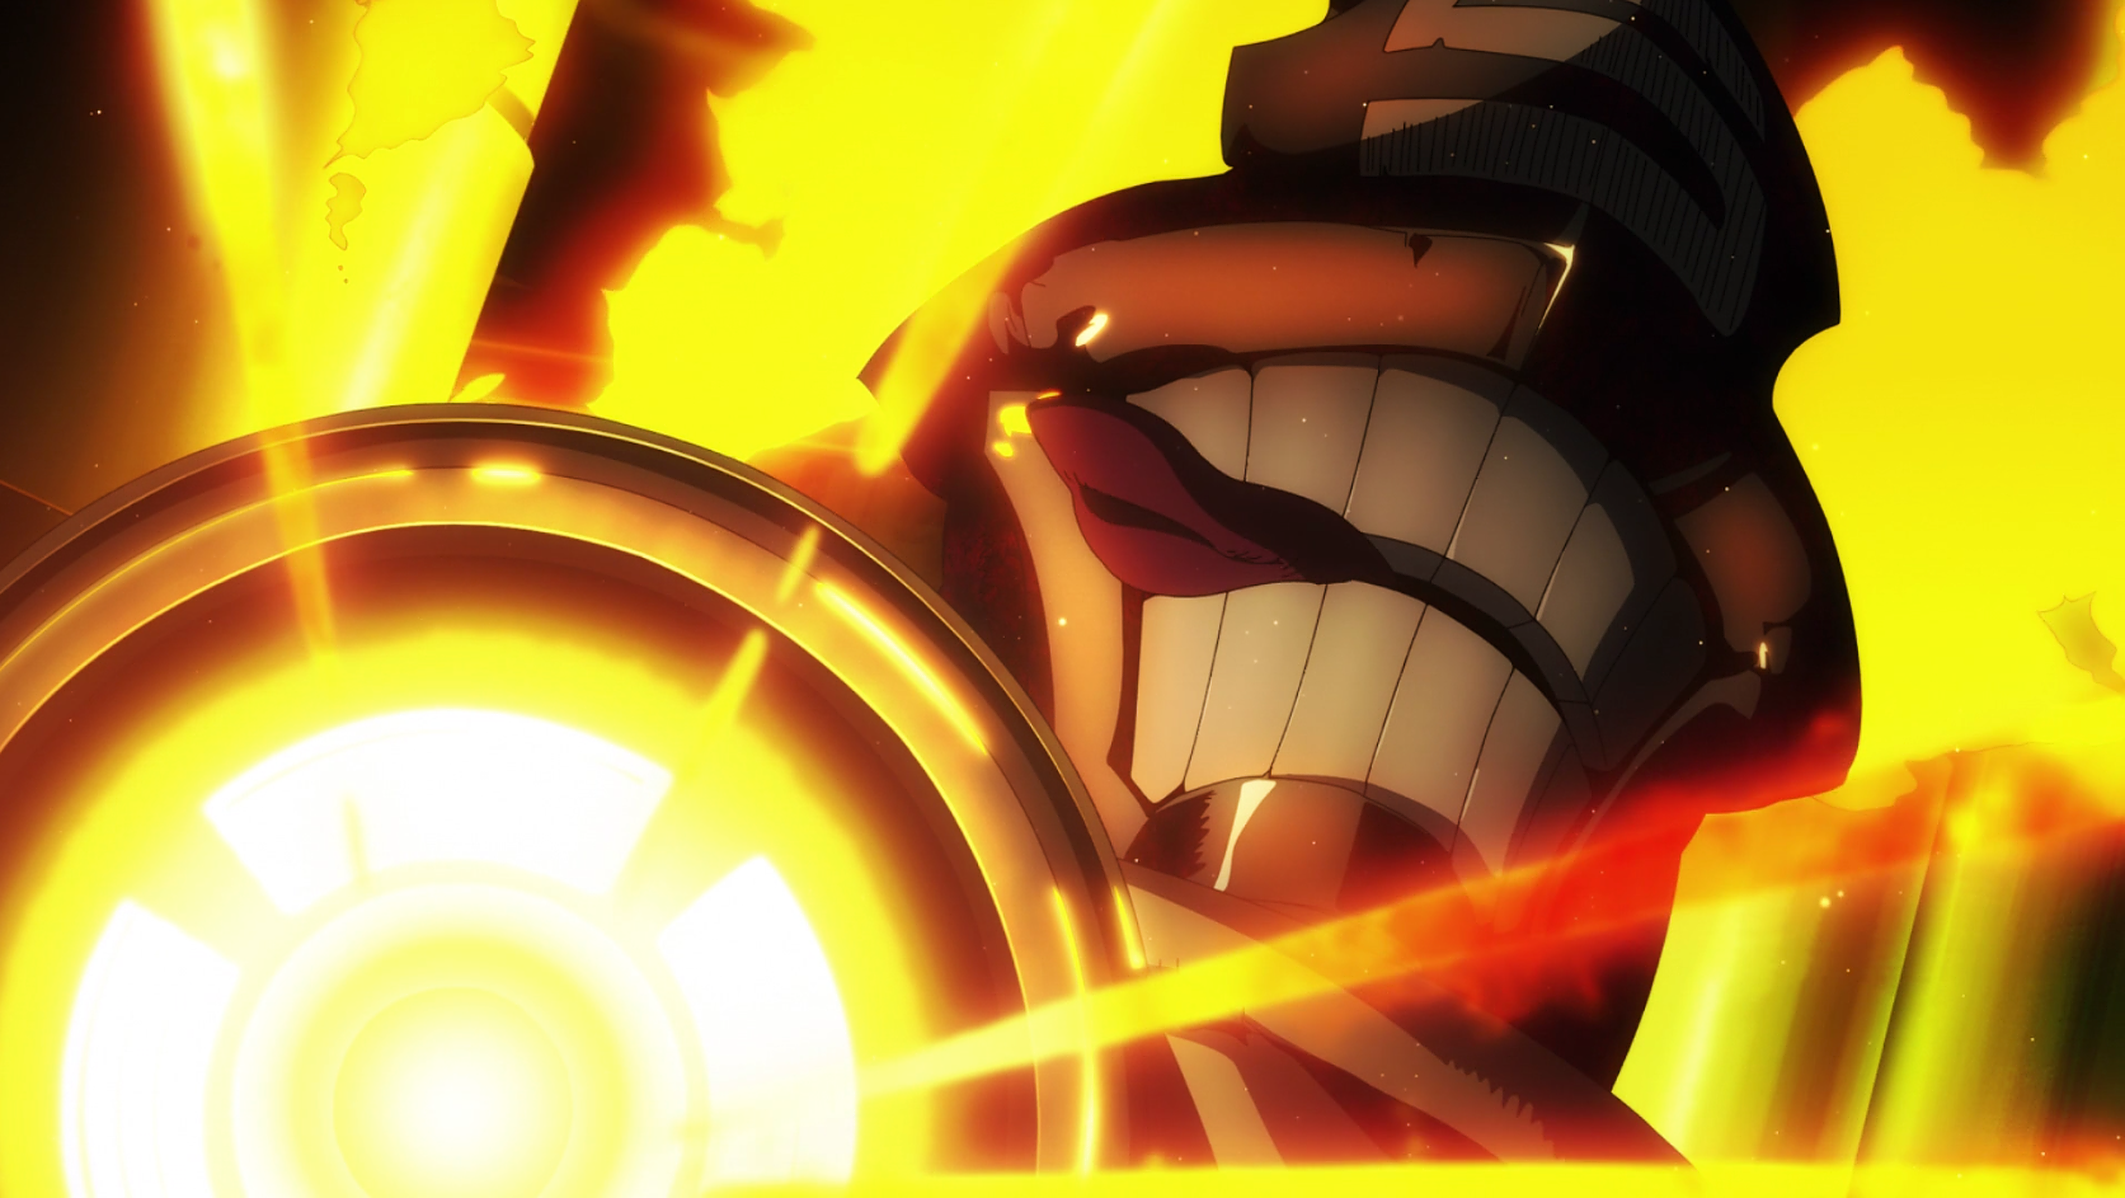 fire force: 'Chainsaw Man' vs 'Fire Force': Know whose job is the toughest  - The Economic Times